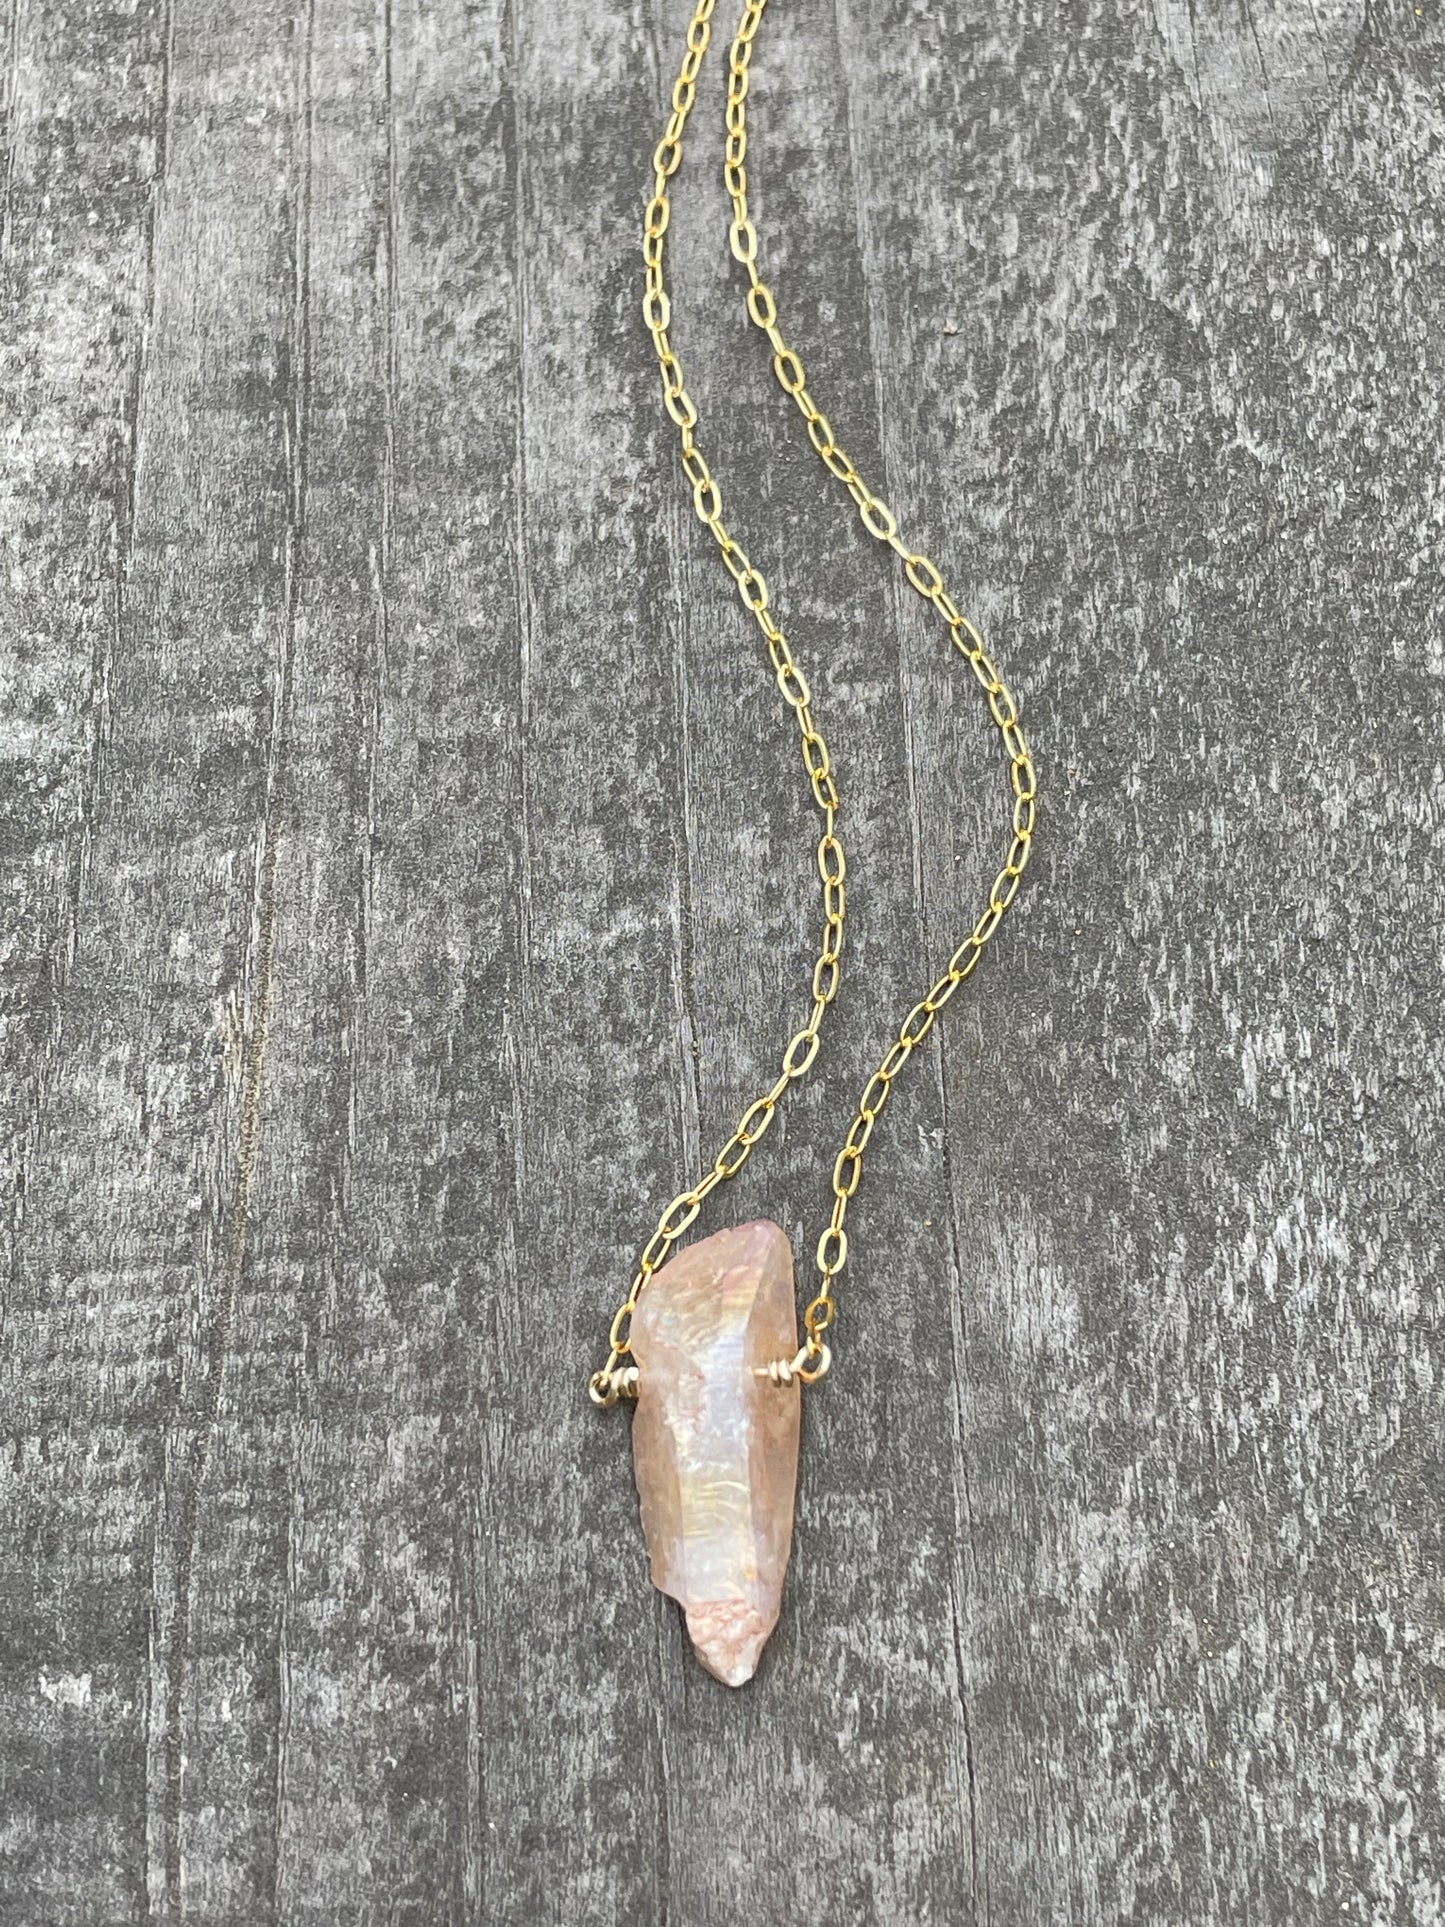 Peach sheen on a quartz crystal wire wrapped onto a gold chain on a wooden background.